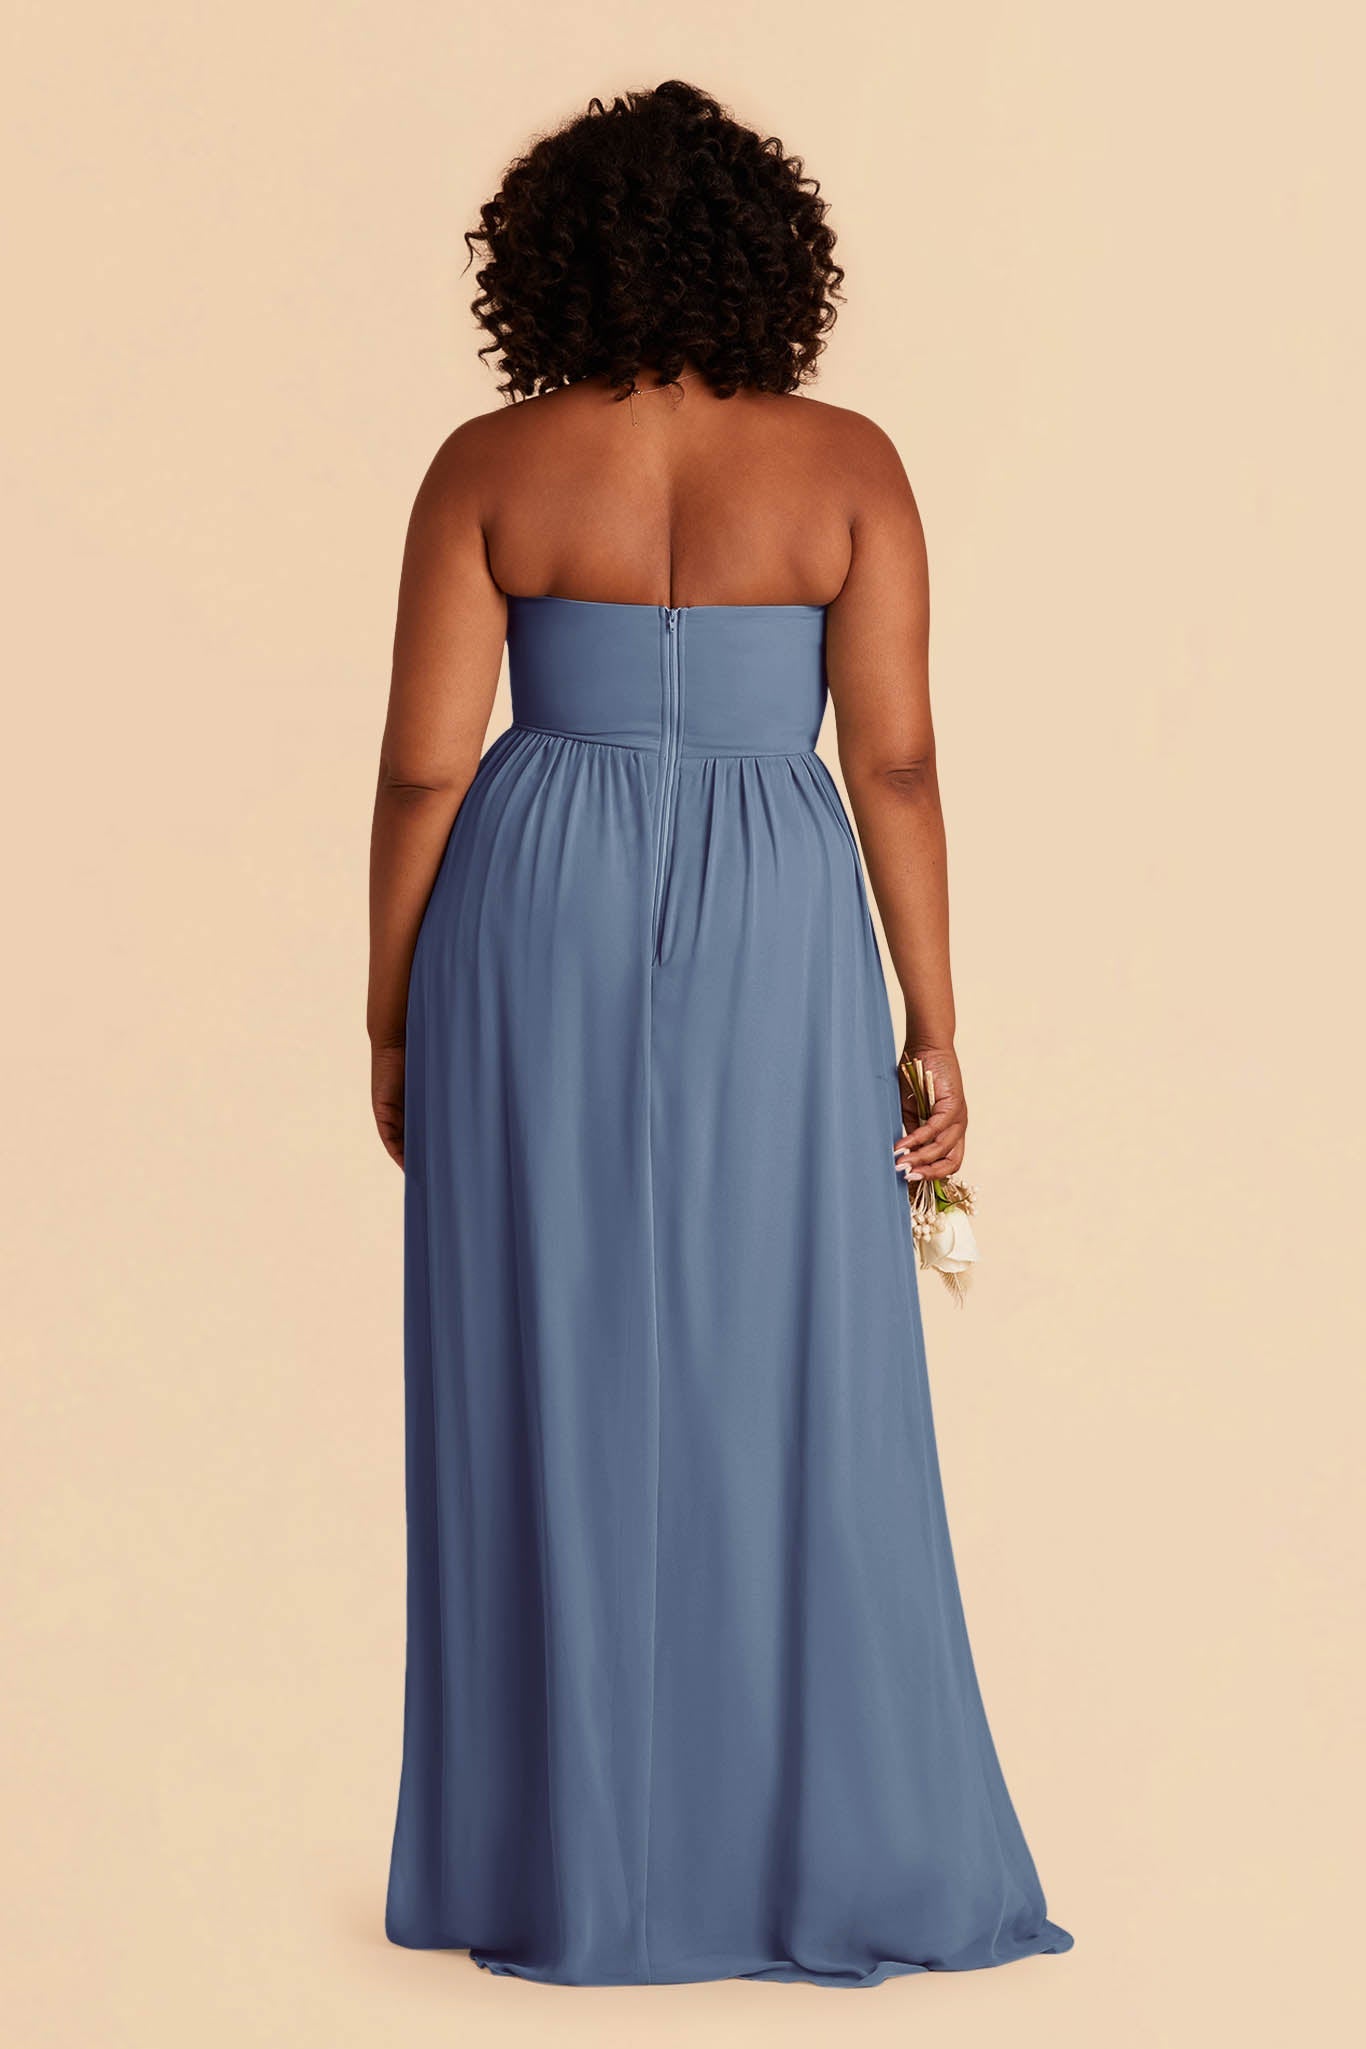 Twilight August Convertible Dress by Birdy Grey